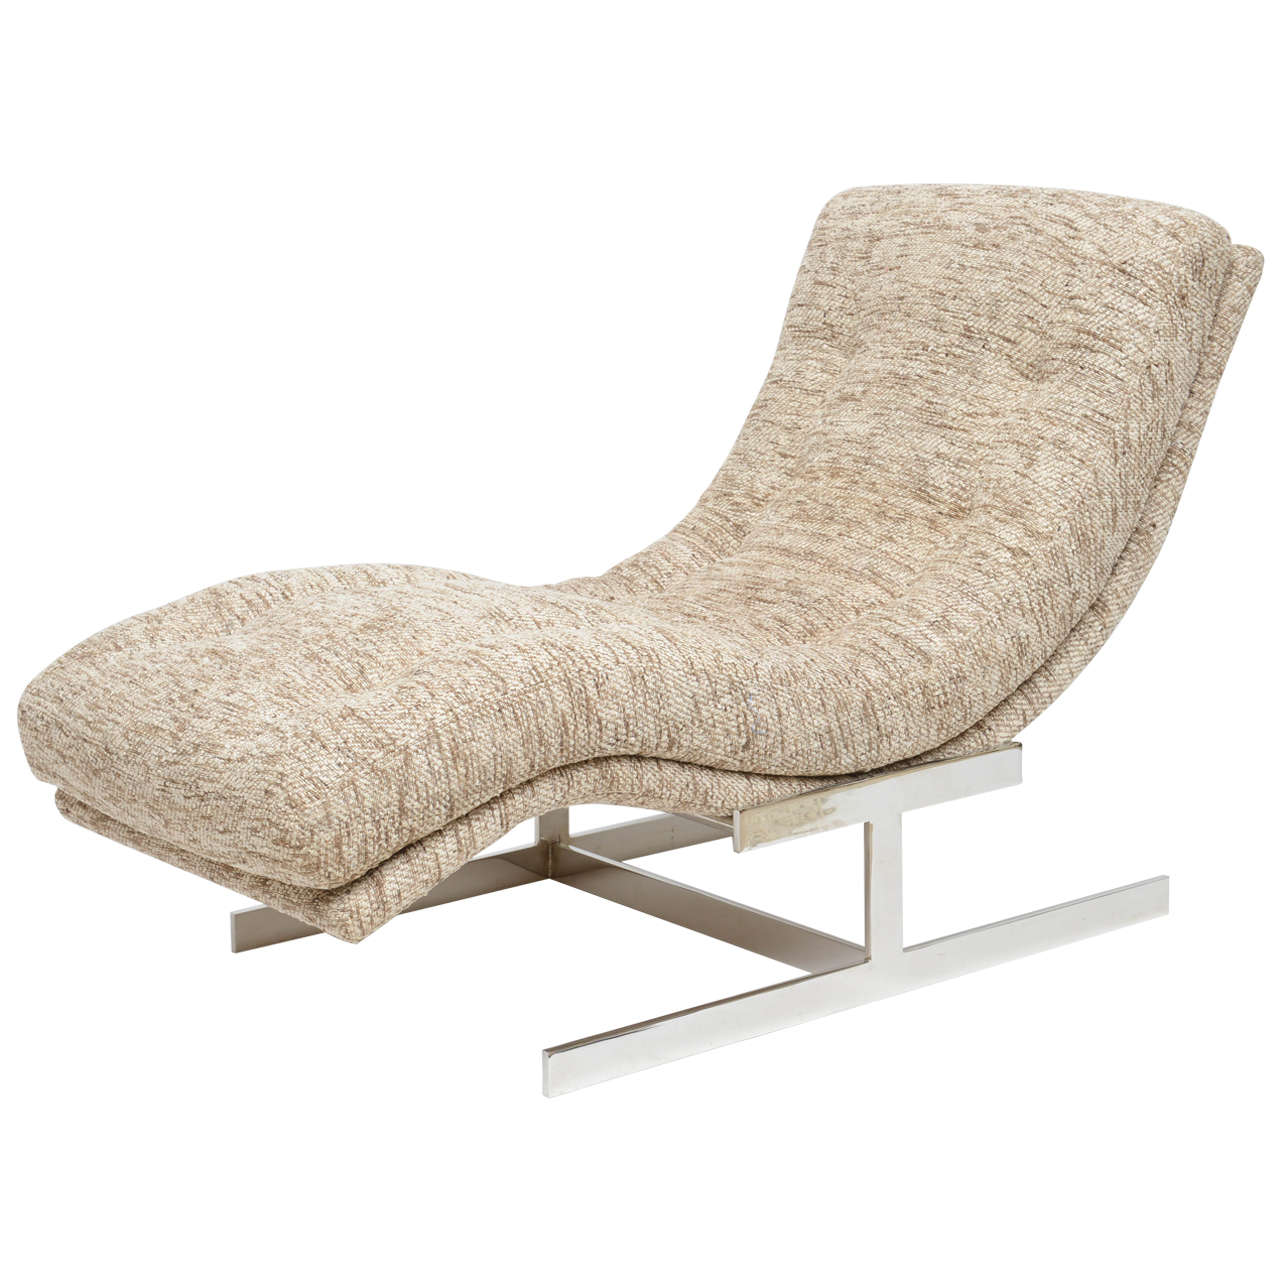 Milo Baughman Wave Chaise Longue Upholstered in Raw Silk